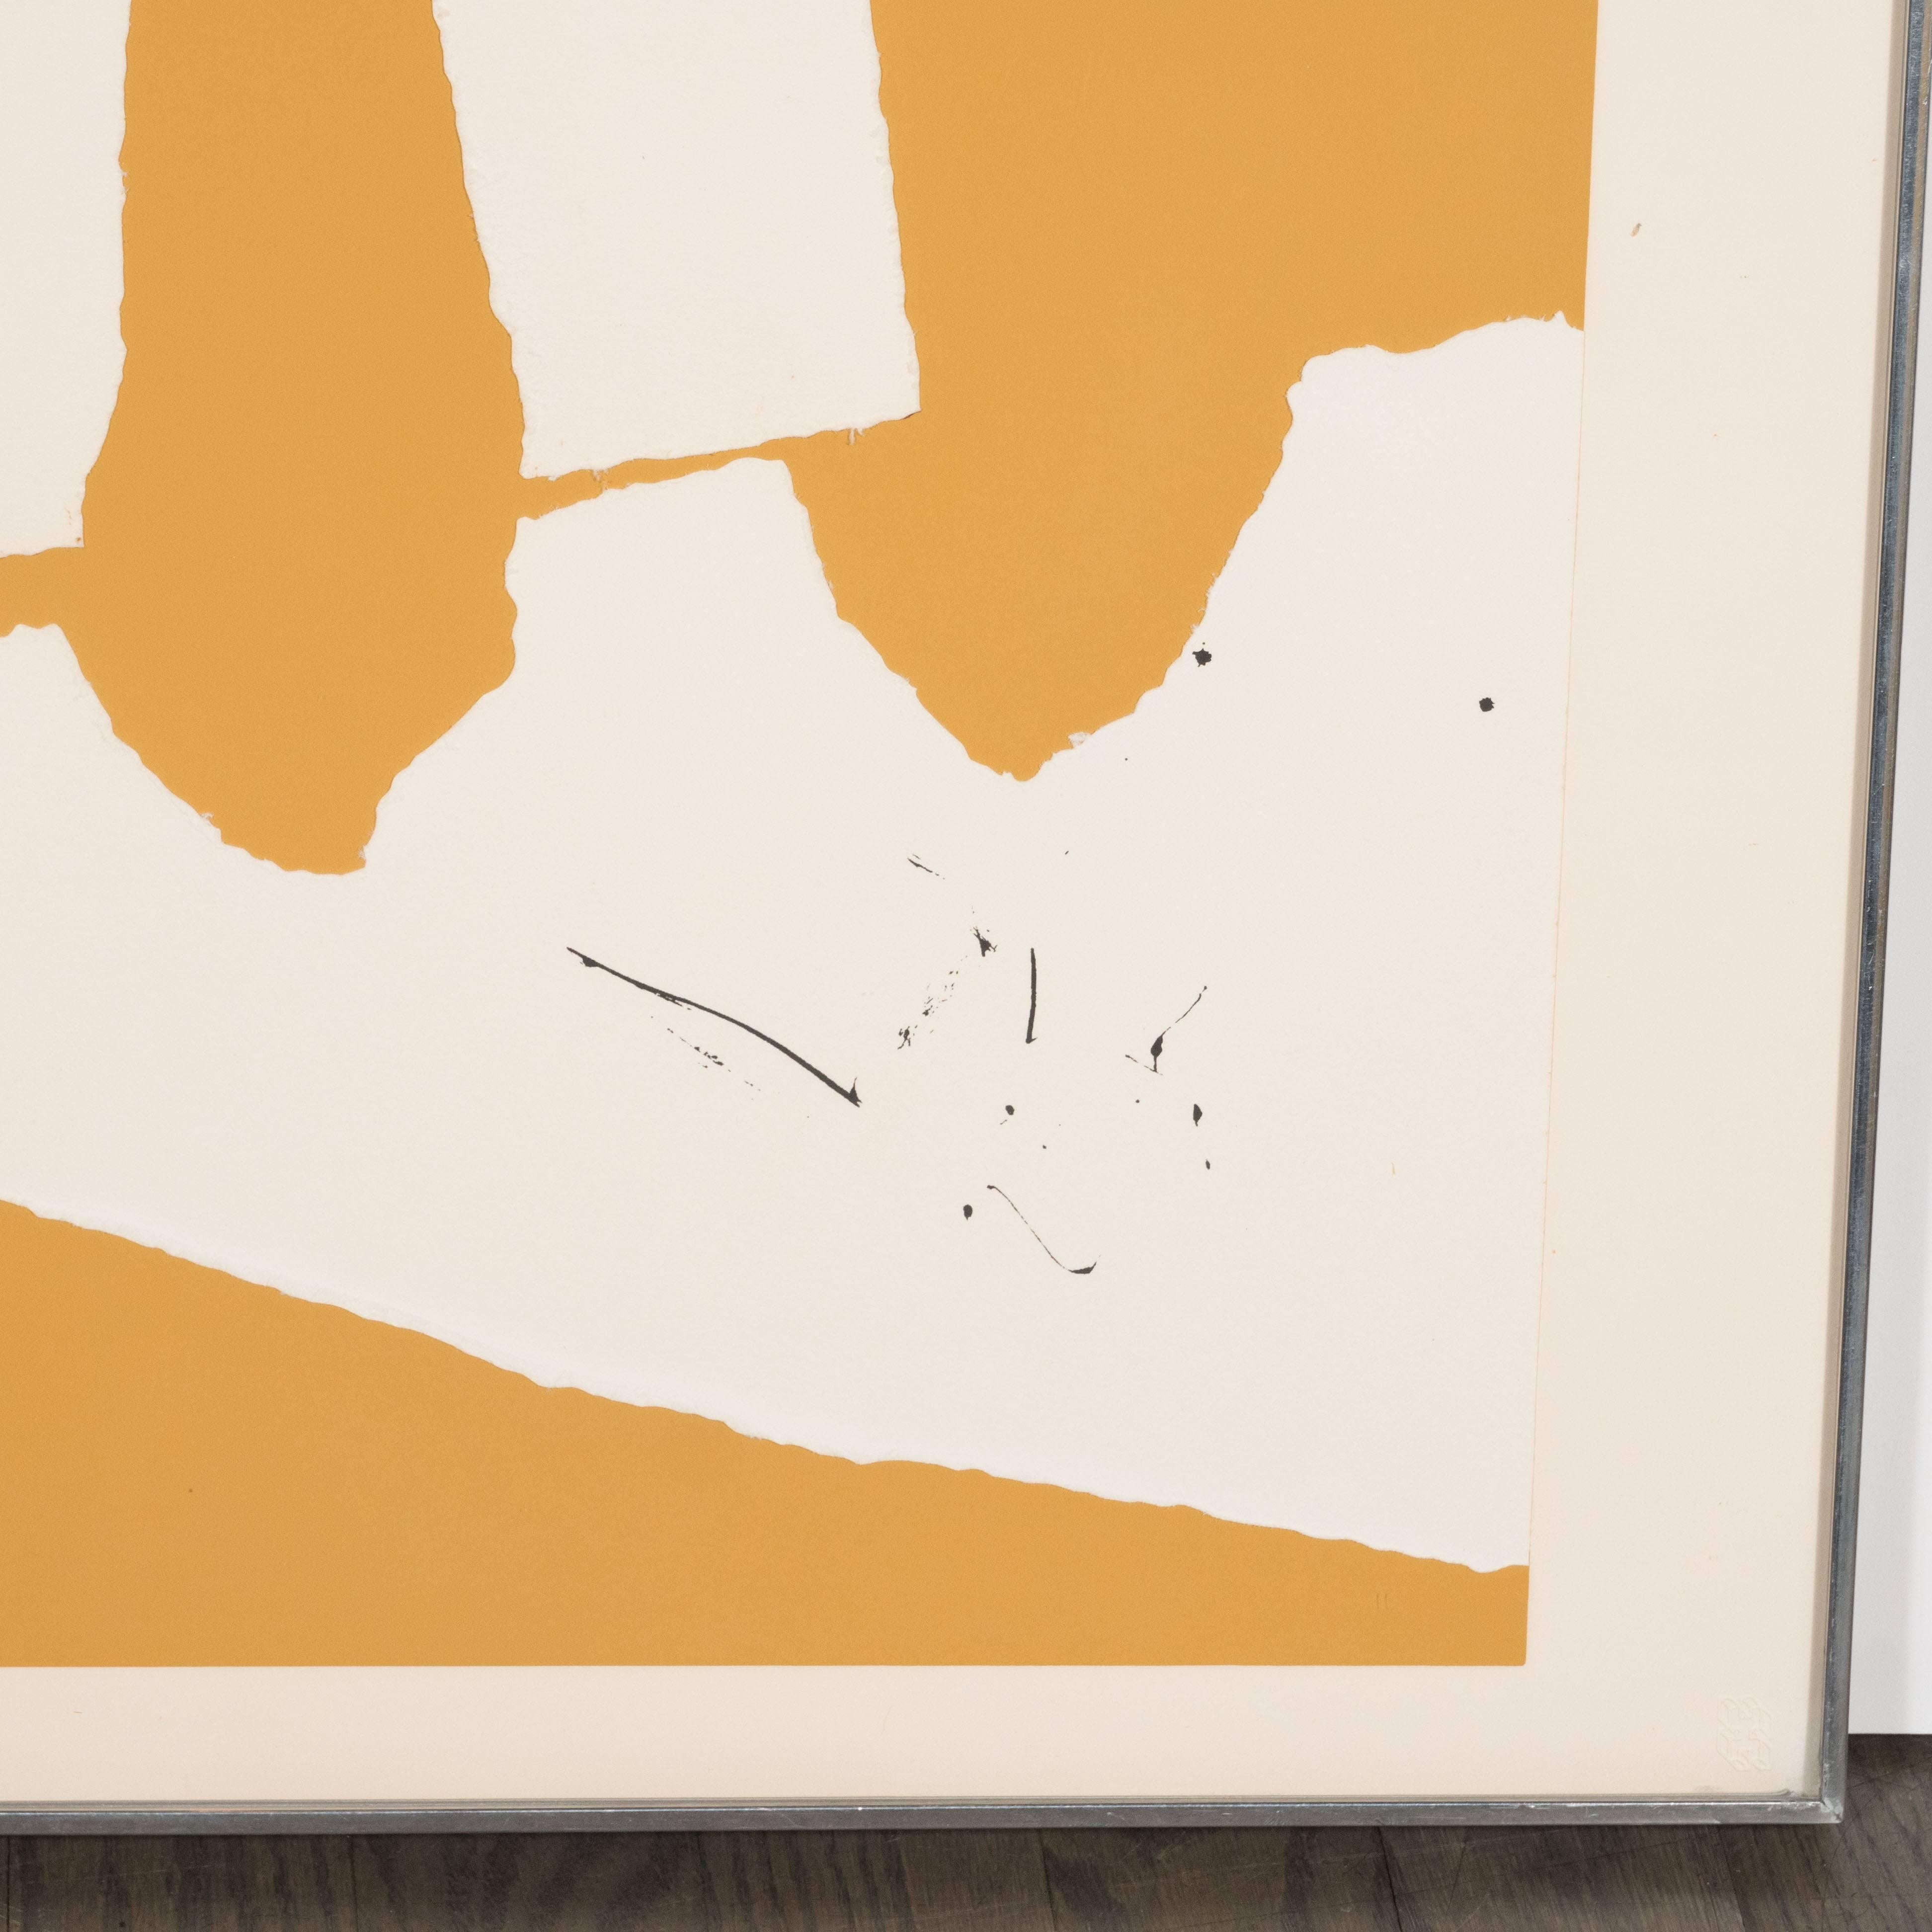 This stunning screen print with collage was realized by the esteemed Abstract Expressionist artist Robert Motherwell in 1964. It features an anthropomorphic form- reminiscent of a stylized topographical form perched above a body of water, with its